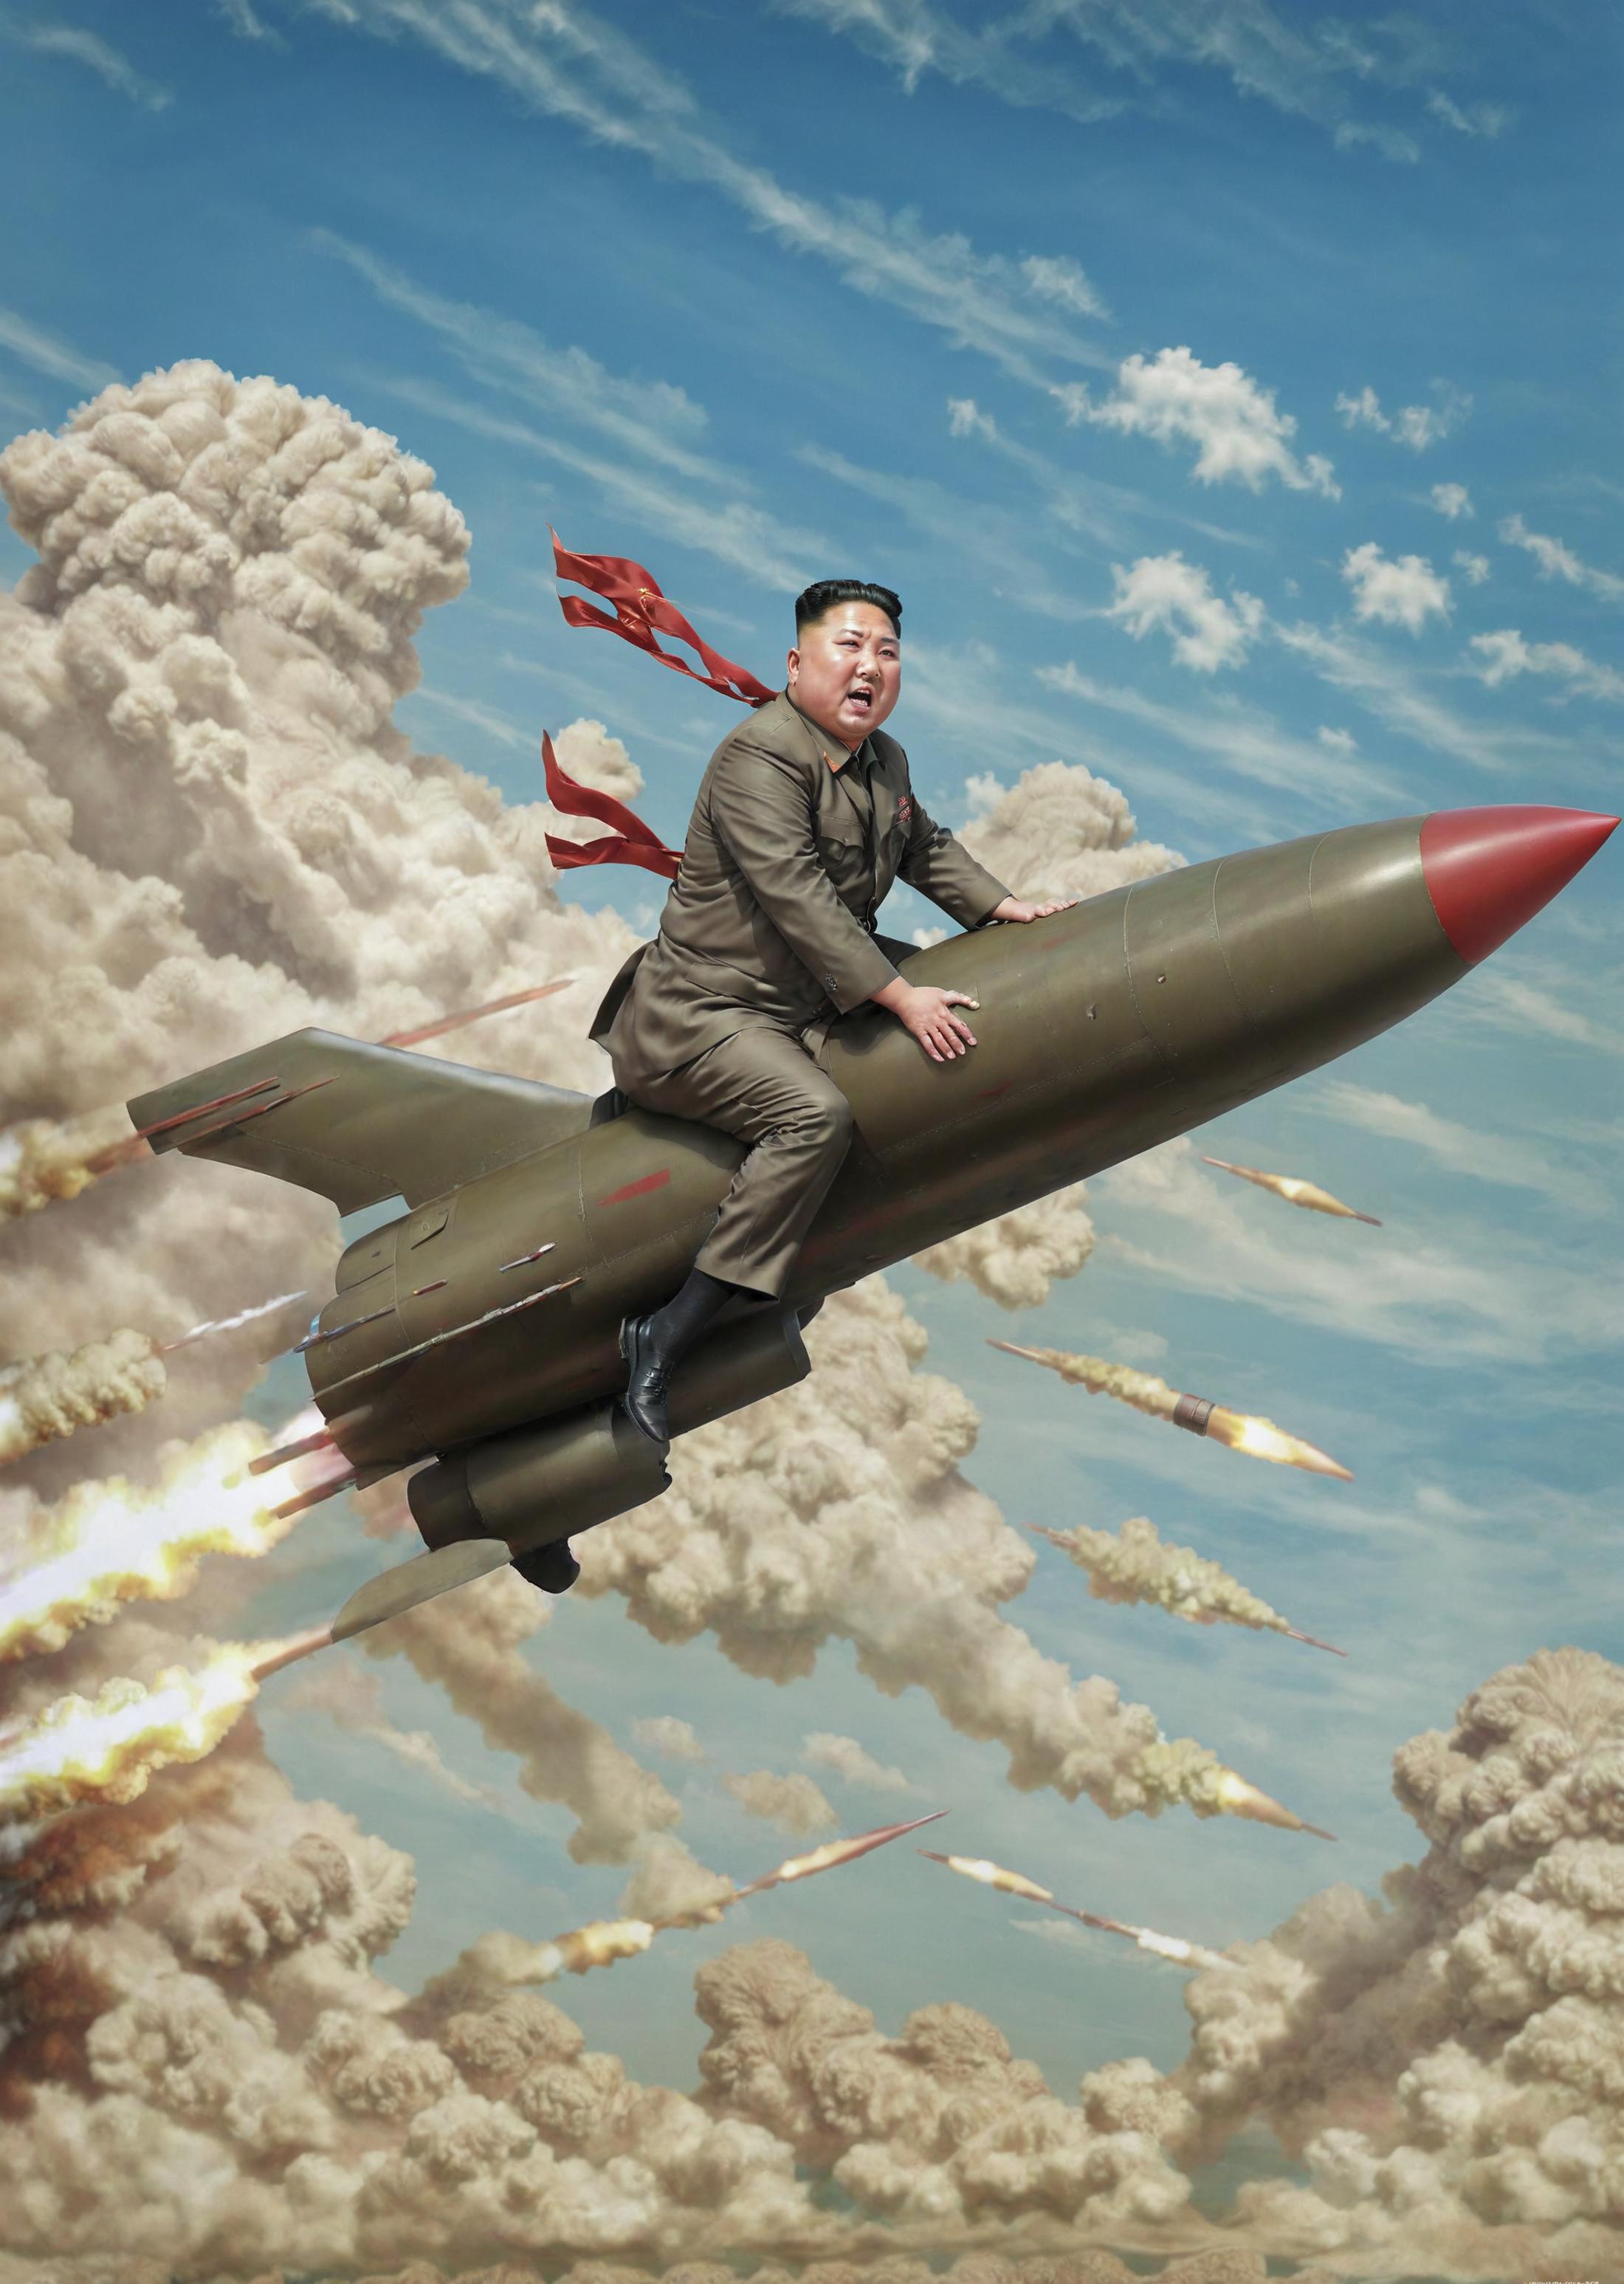 A painting of a man riding a rocket with missiles in the background.